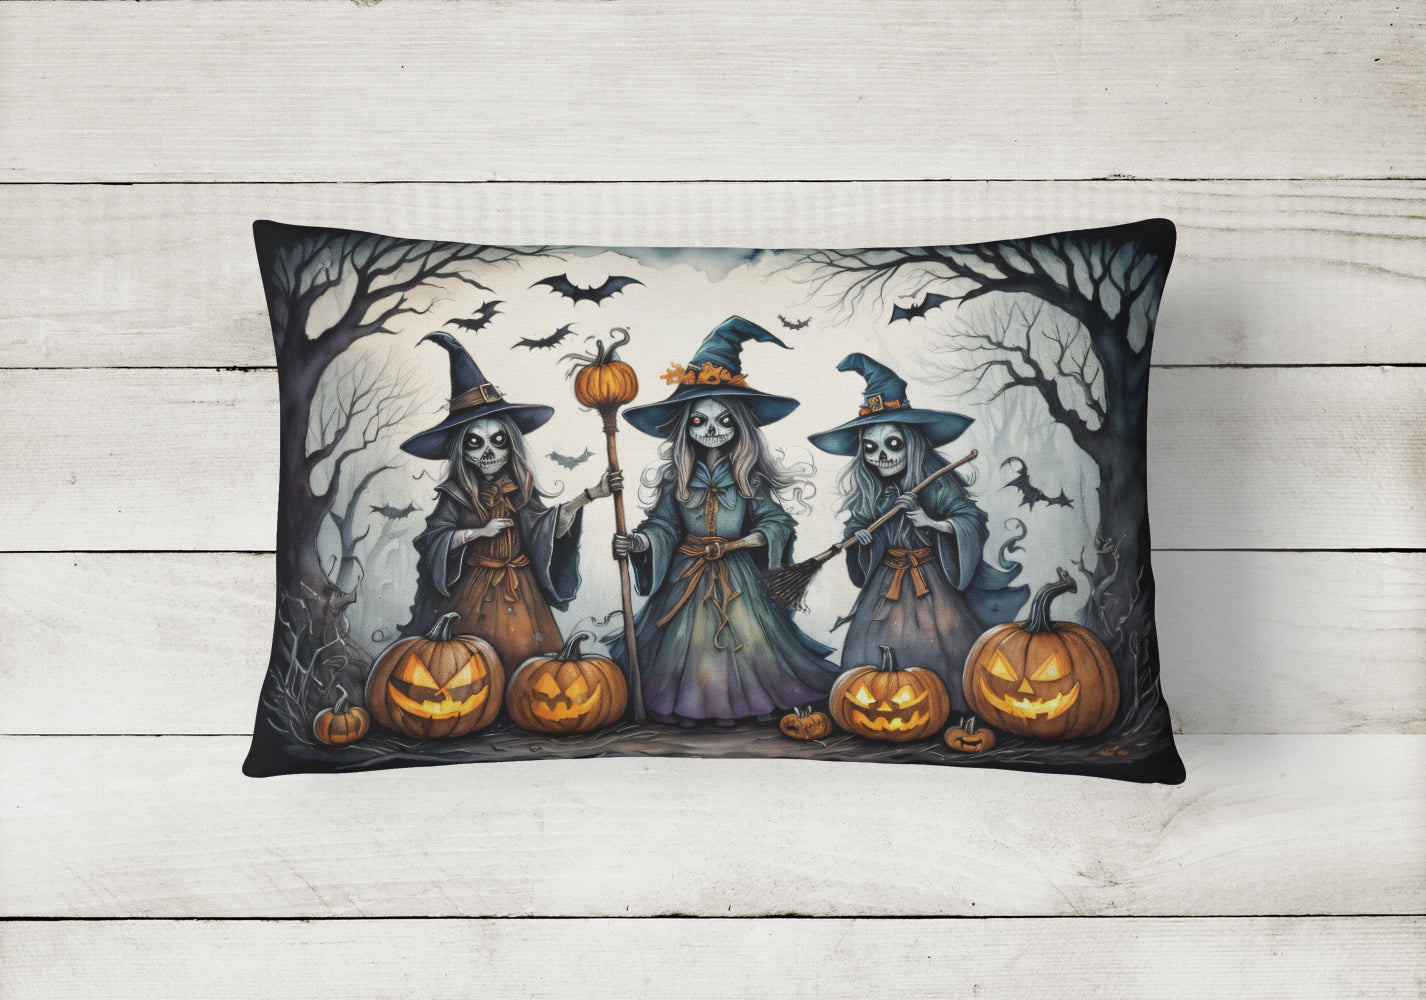 Buy this Witches Spooky Halloween Fabric Decorative Pillow